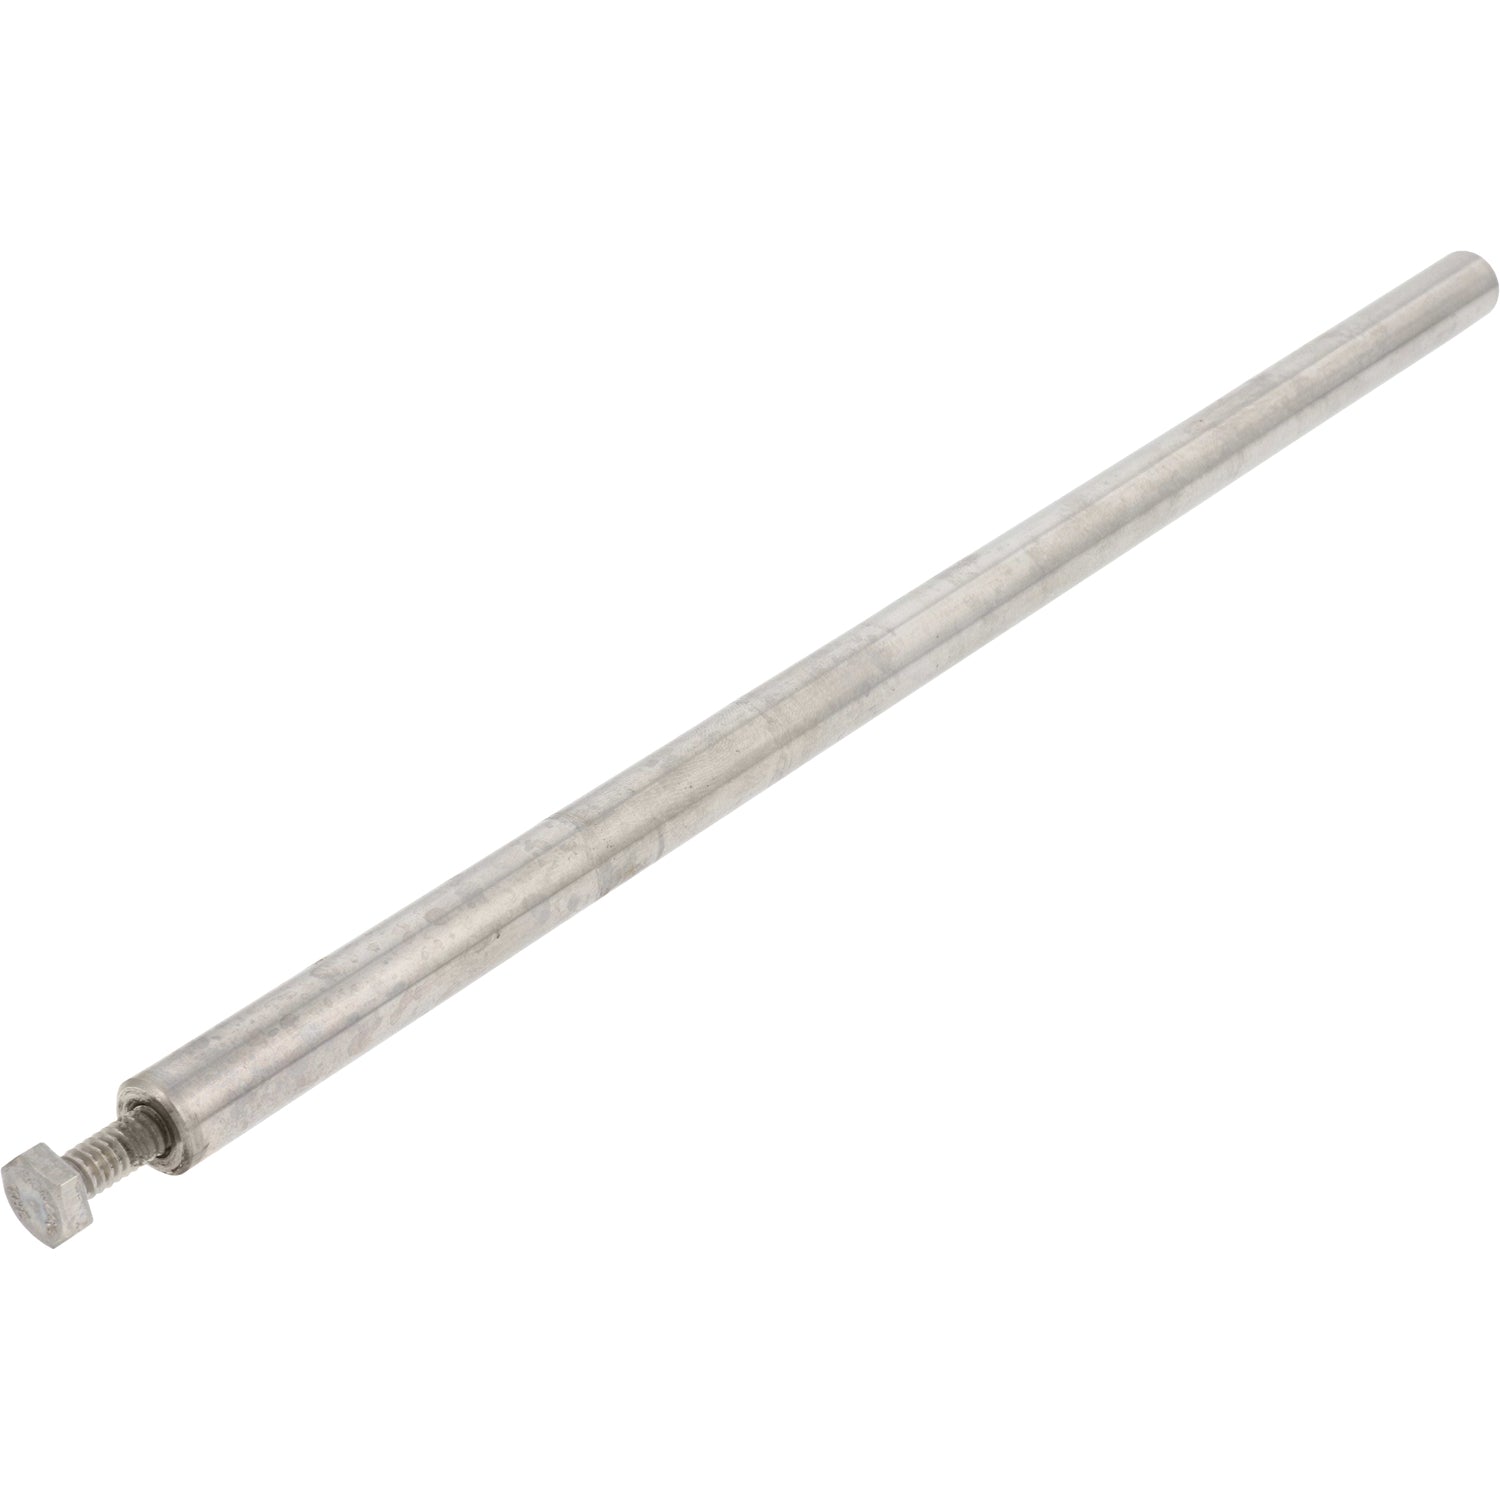 Stainless steel tapped linear motion shaft on white background.